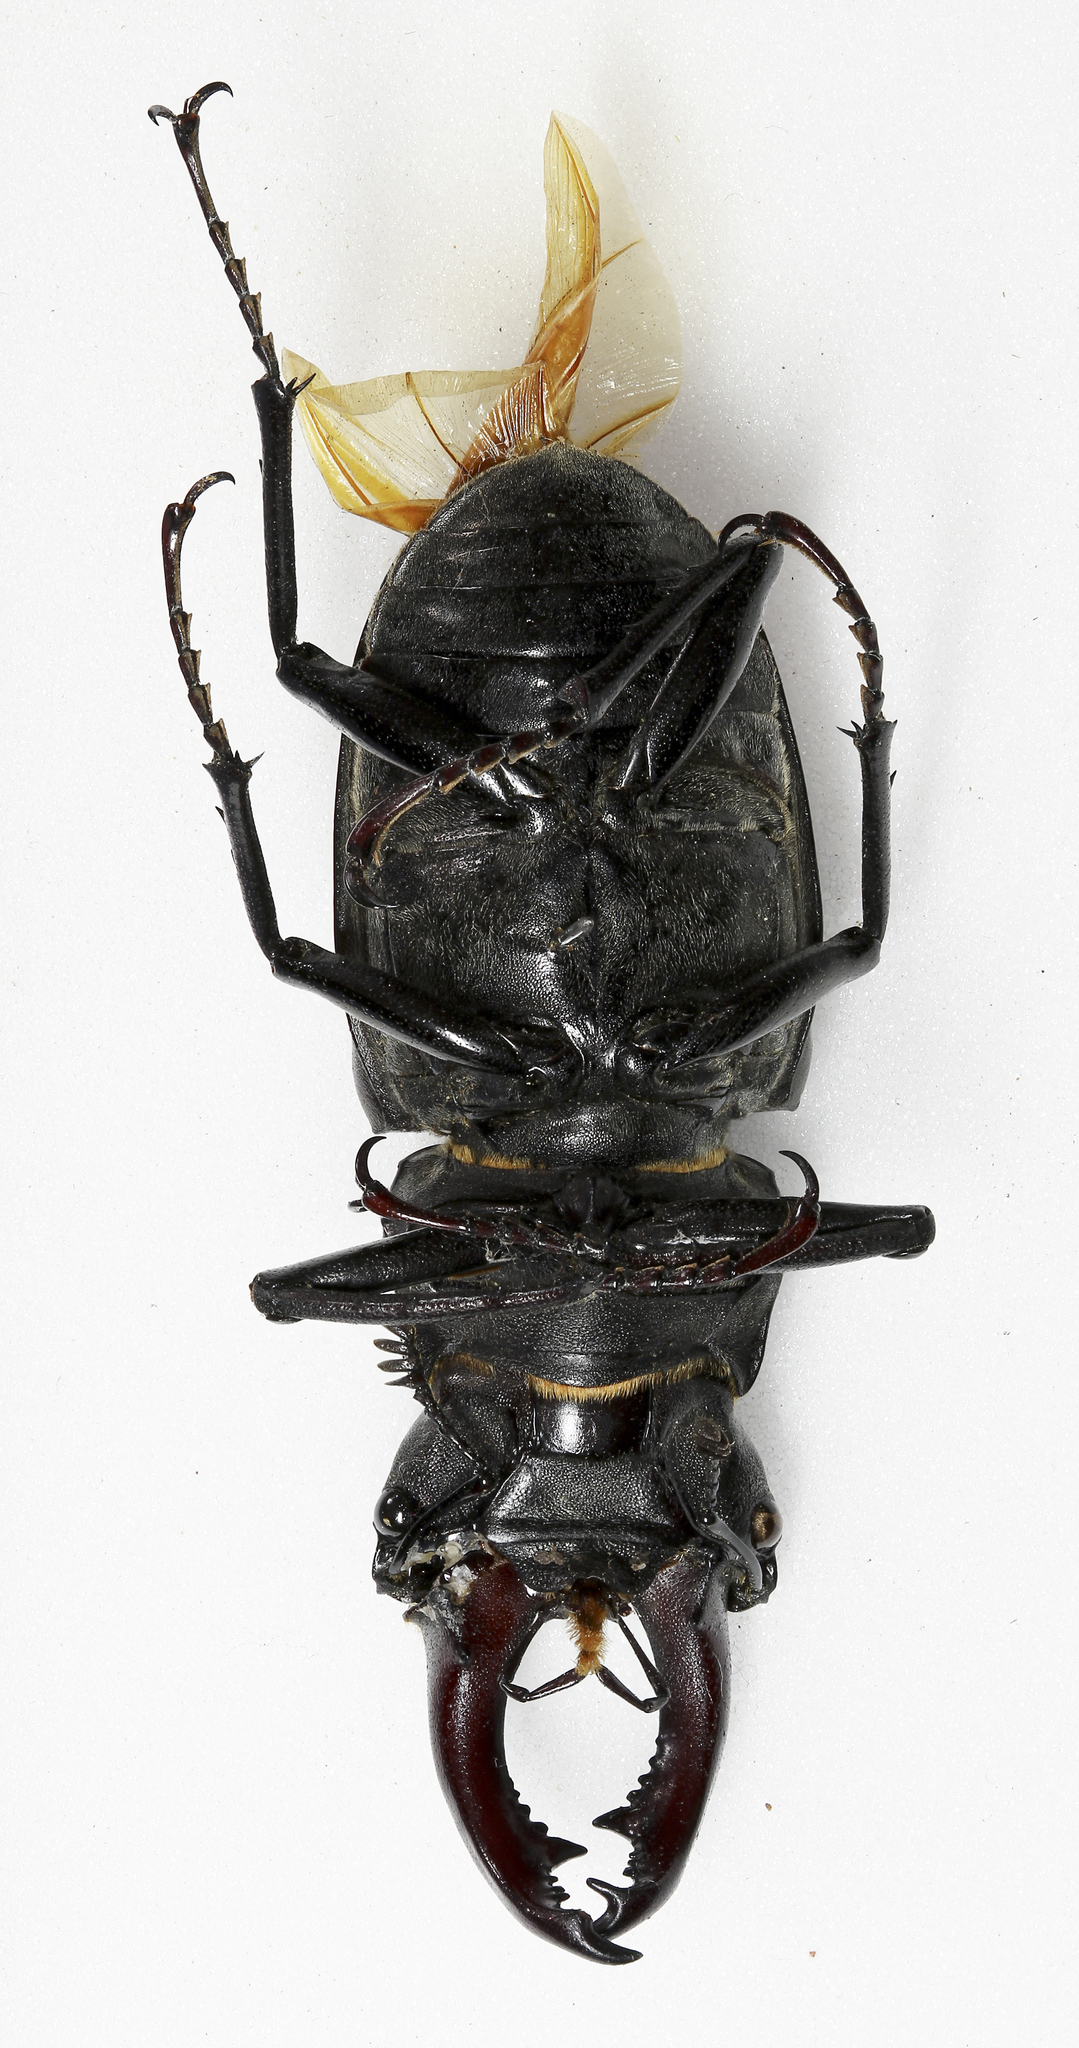 Image of Stag Beetle